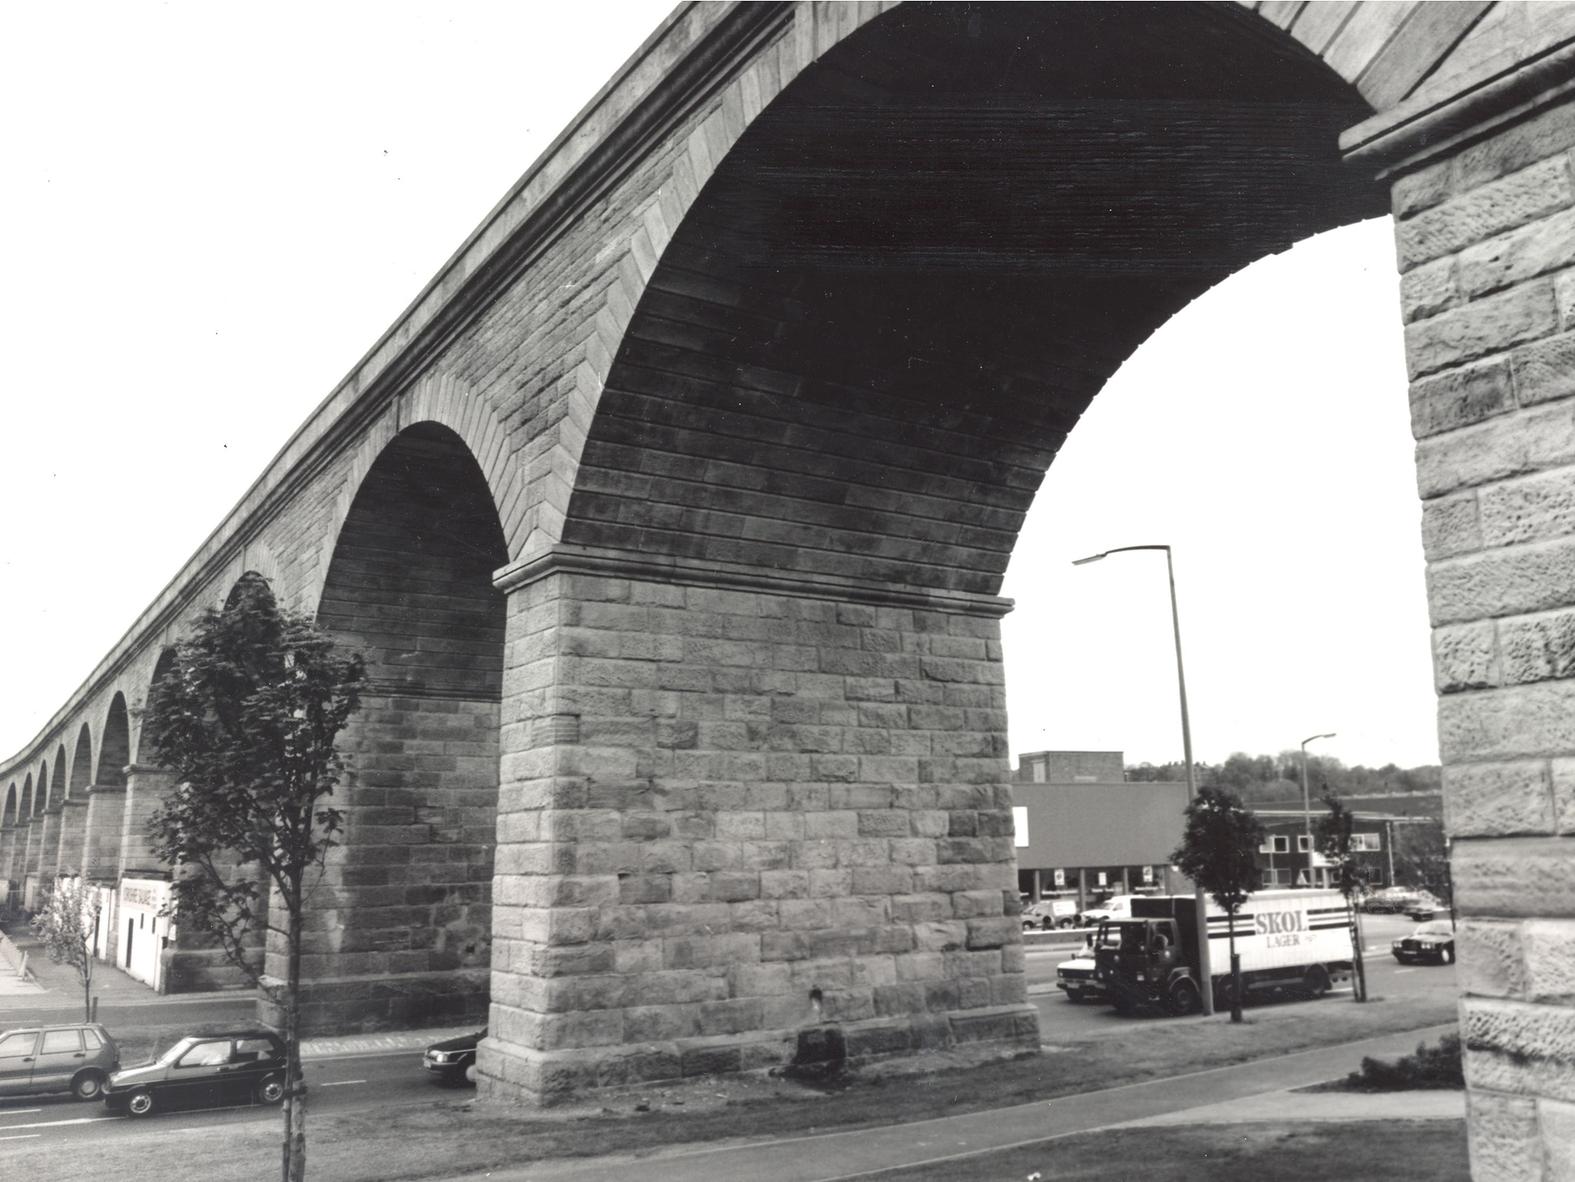 The Kirkstall Road viaduct. Have you spotted the van advertising Skol lager?